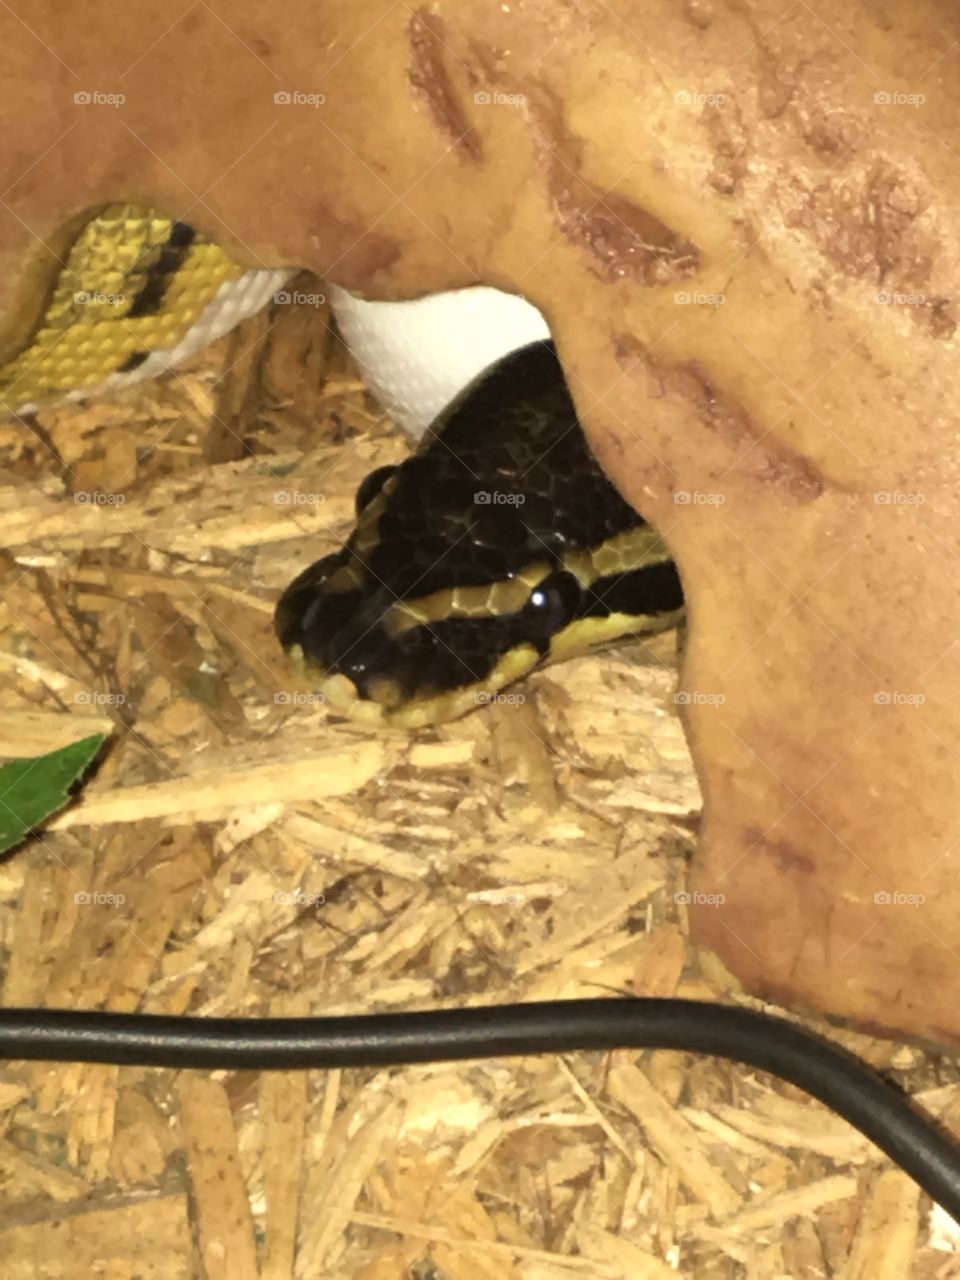 Ball python poking its head out